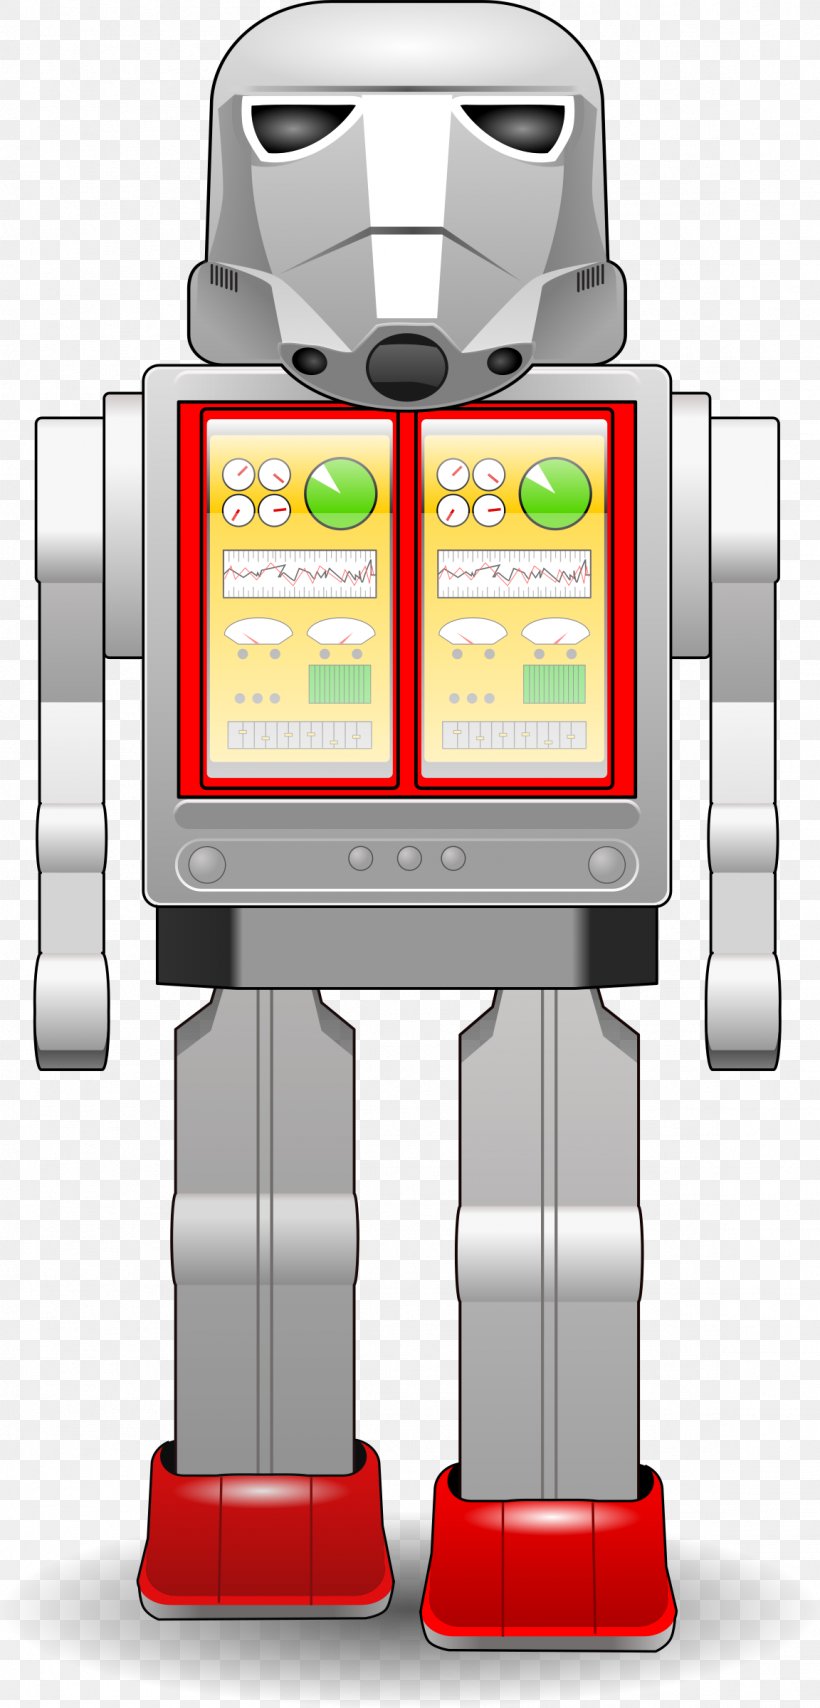 Download Clip Art, PNG, 1152x2400px, Photography, Machine, Robot, Technology, Telephony Download Free